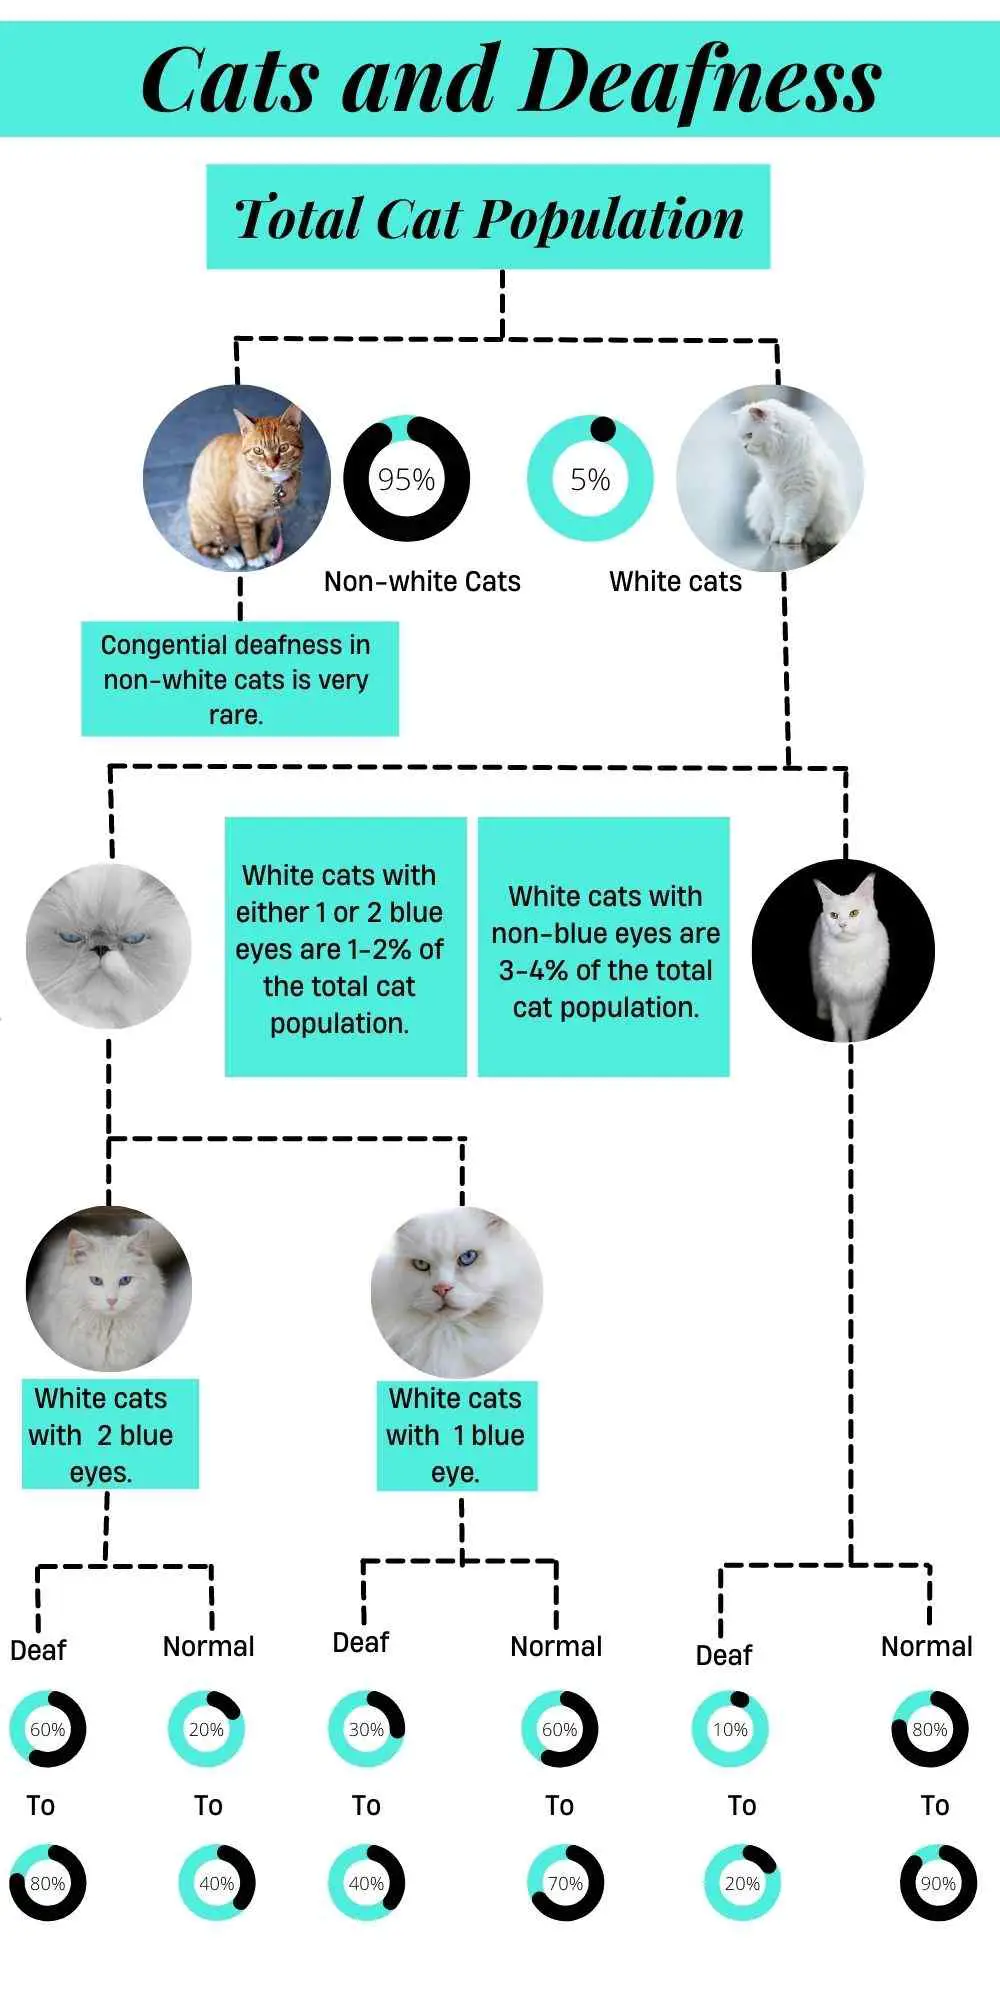 This infographic shows the percentage of deafness in cats